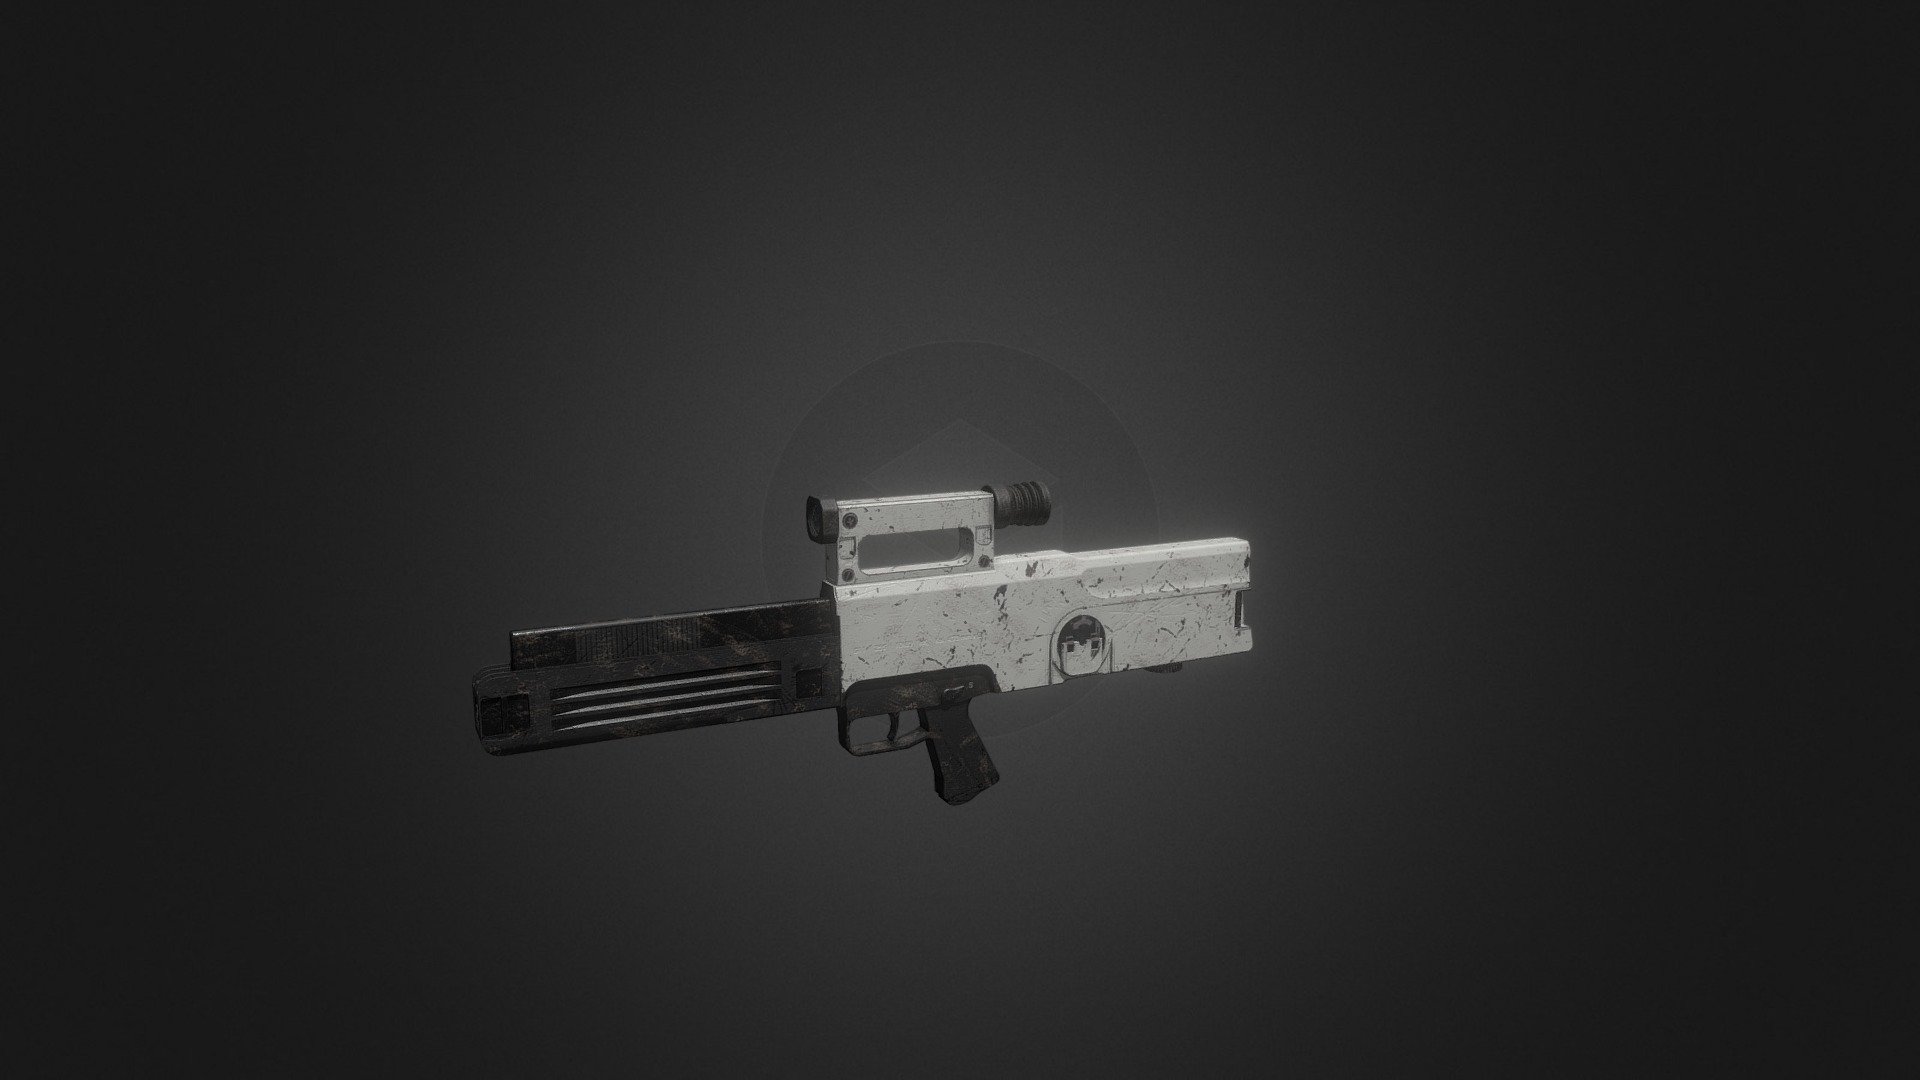 HK G11 rifle witn design from classical Fallout game 3d model